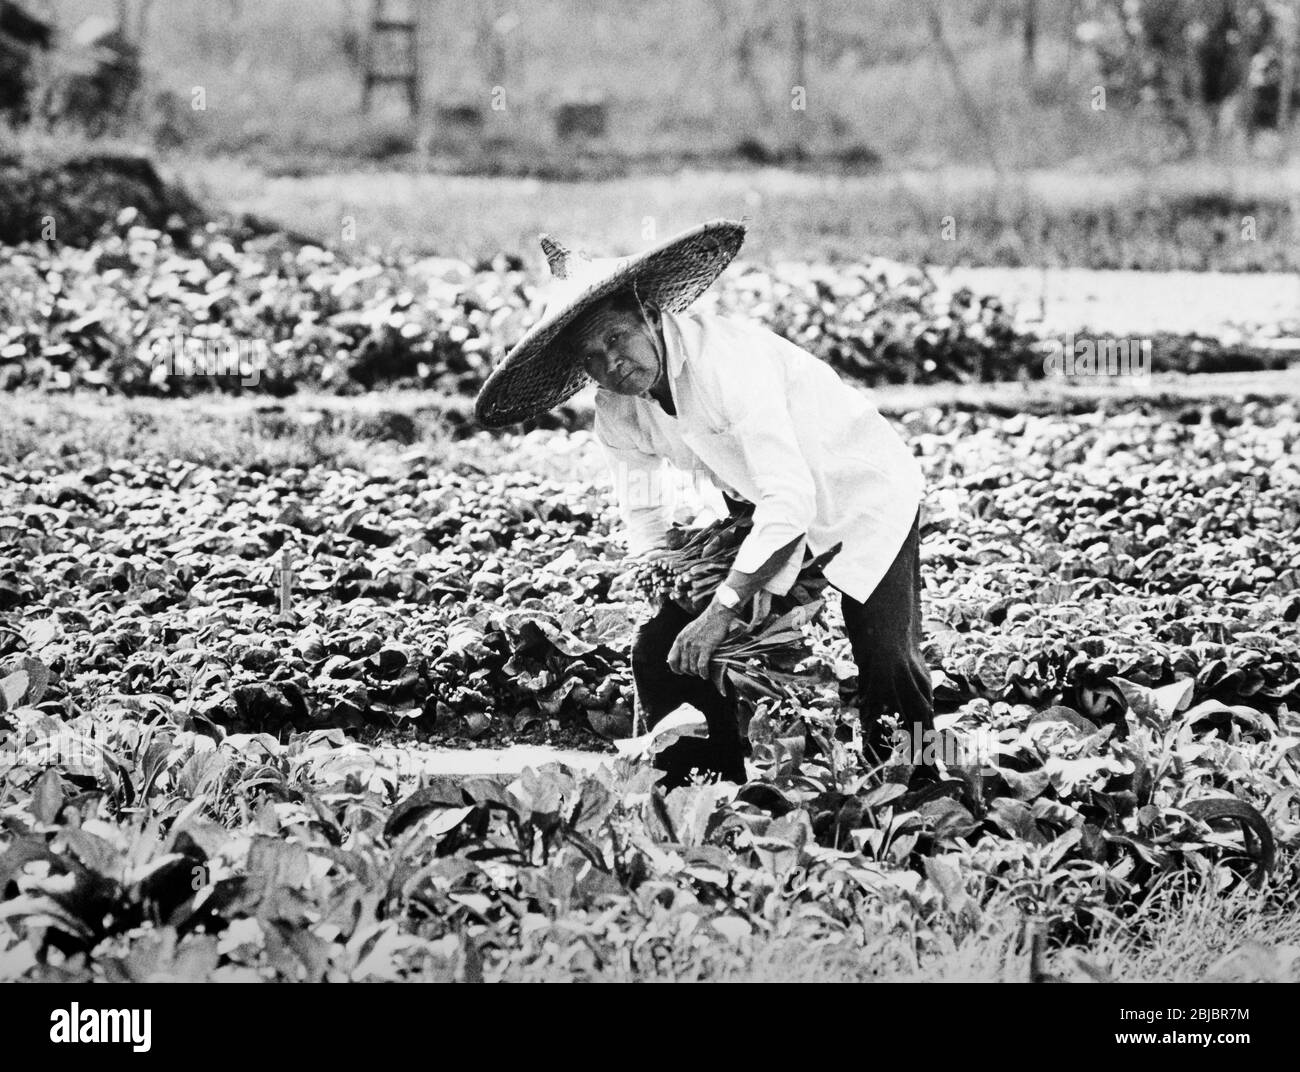 Hong Kong October 1986 Vegtable picker working in the fields in Fanling. The picture is is part of a collection of photographs taken in Hong Kong between September and November, 1986. They represent a snapshot of Daily Life in the Crown Colony eleven years before sovereignty was transferred back to mainland China. Photograph by Howard Walker / Alamy. Stock Photo